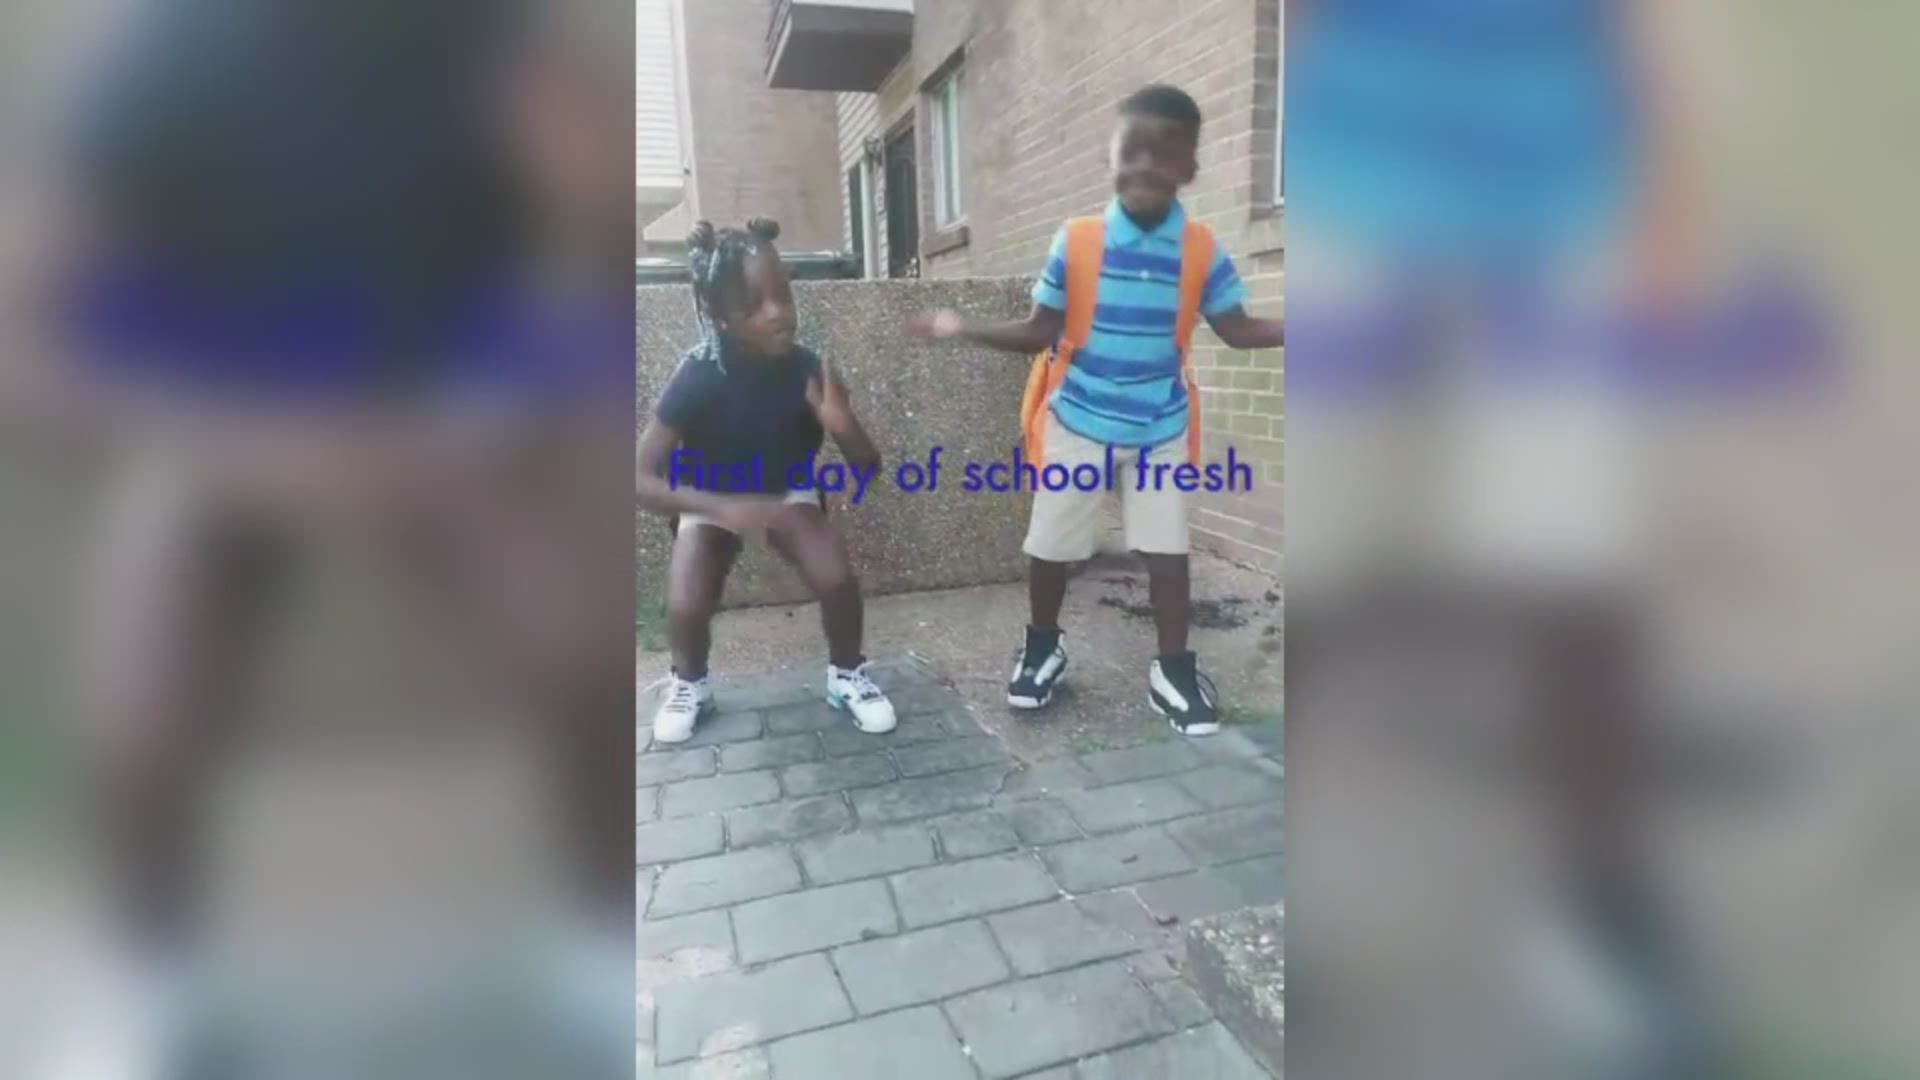 8-year-old Kymani and 6-year-old Kyree kicked off their first day of school with an awesome "First Day of School Fresh" dance!